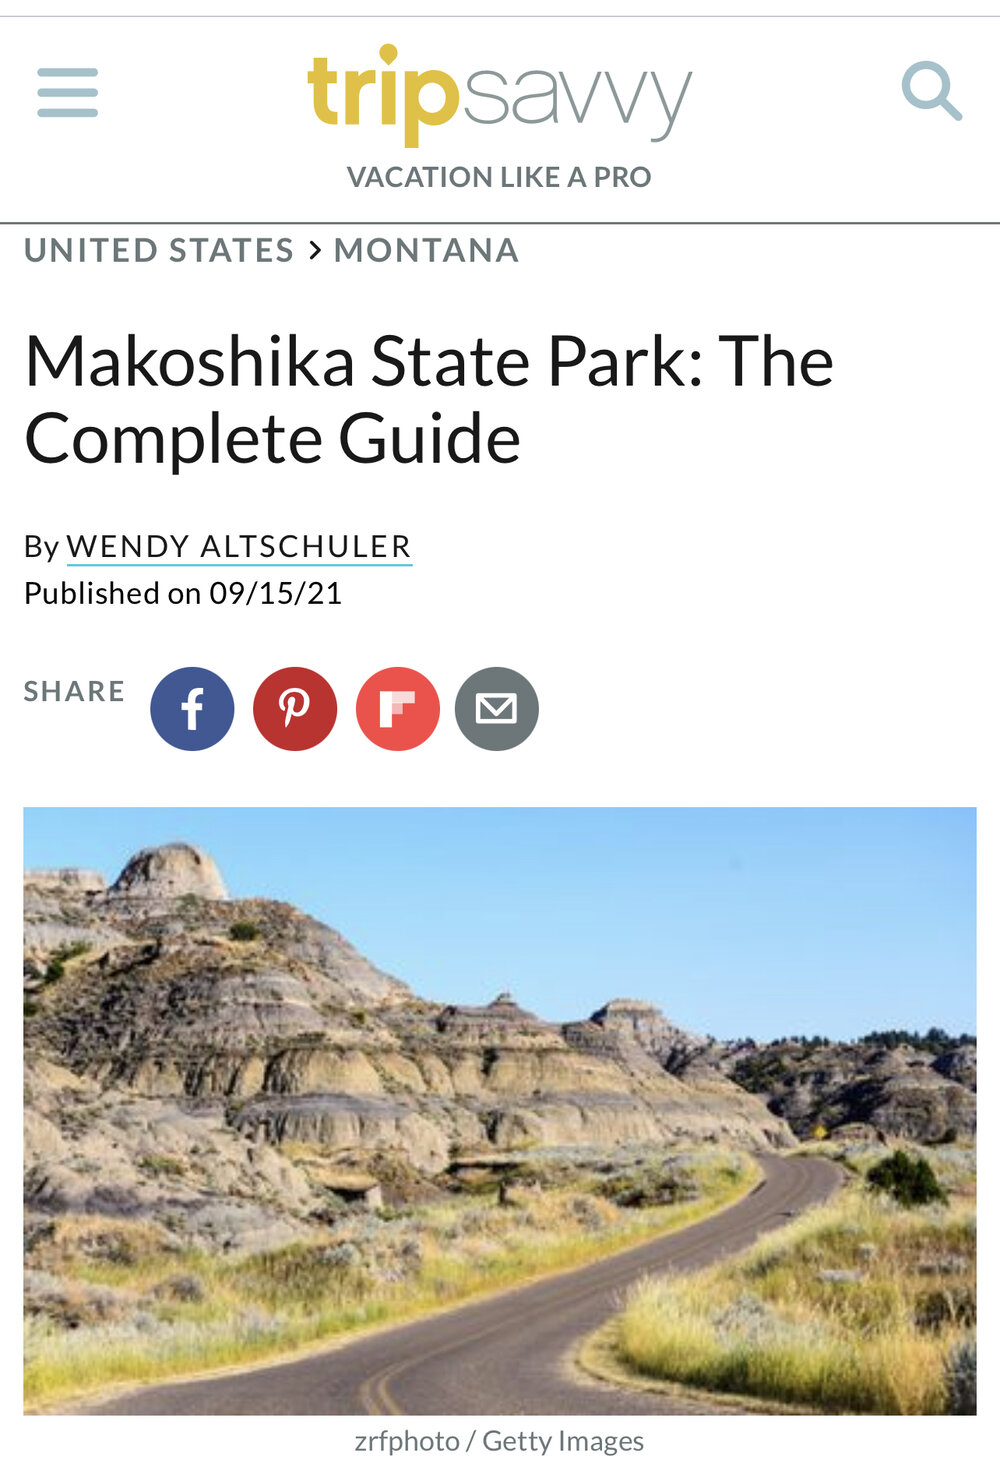 Makoshika State Park: The Complete Guide